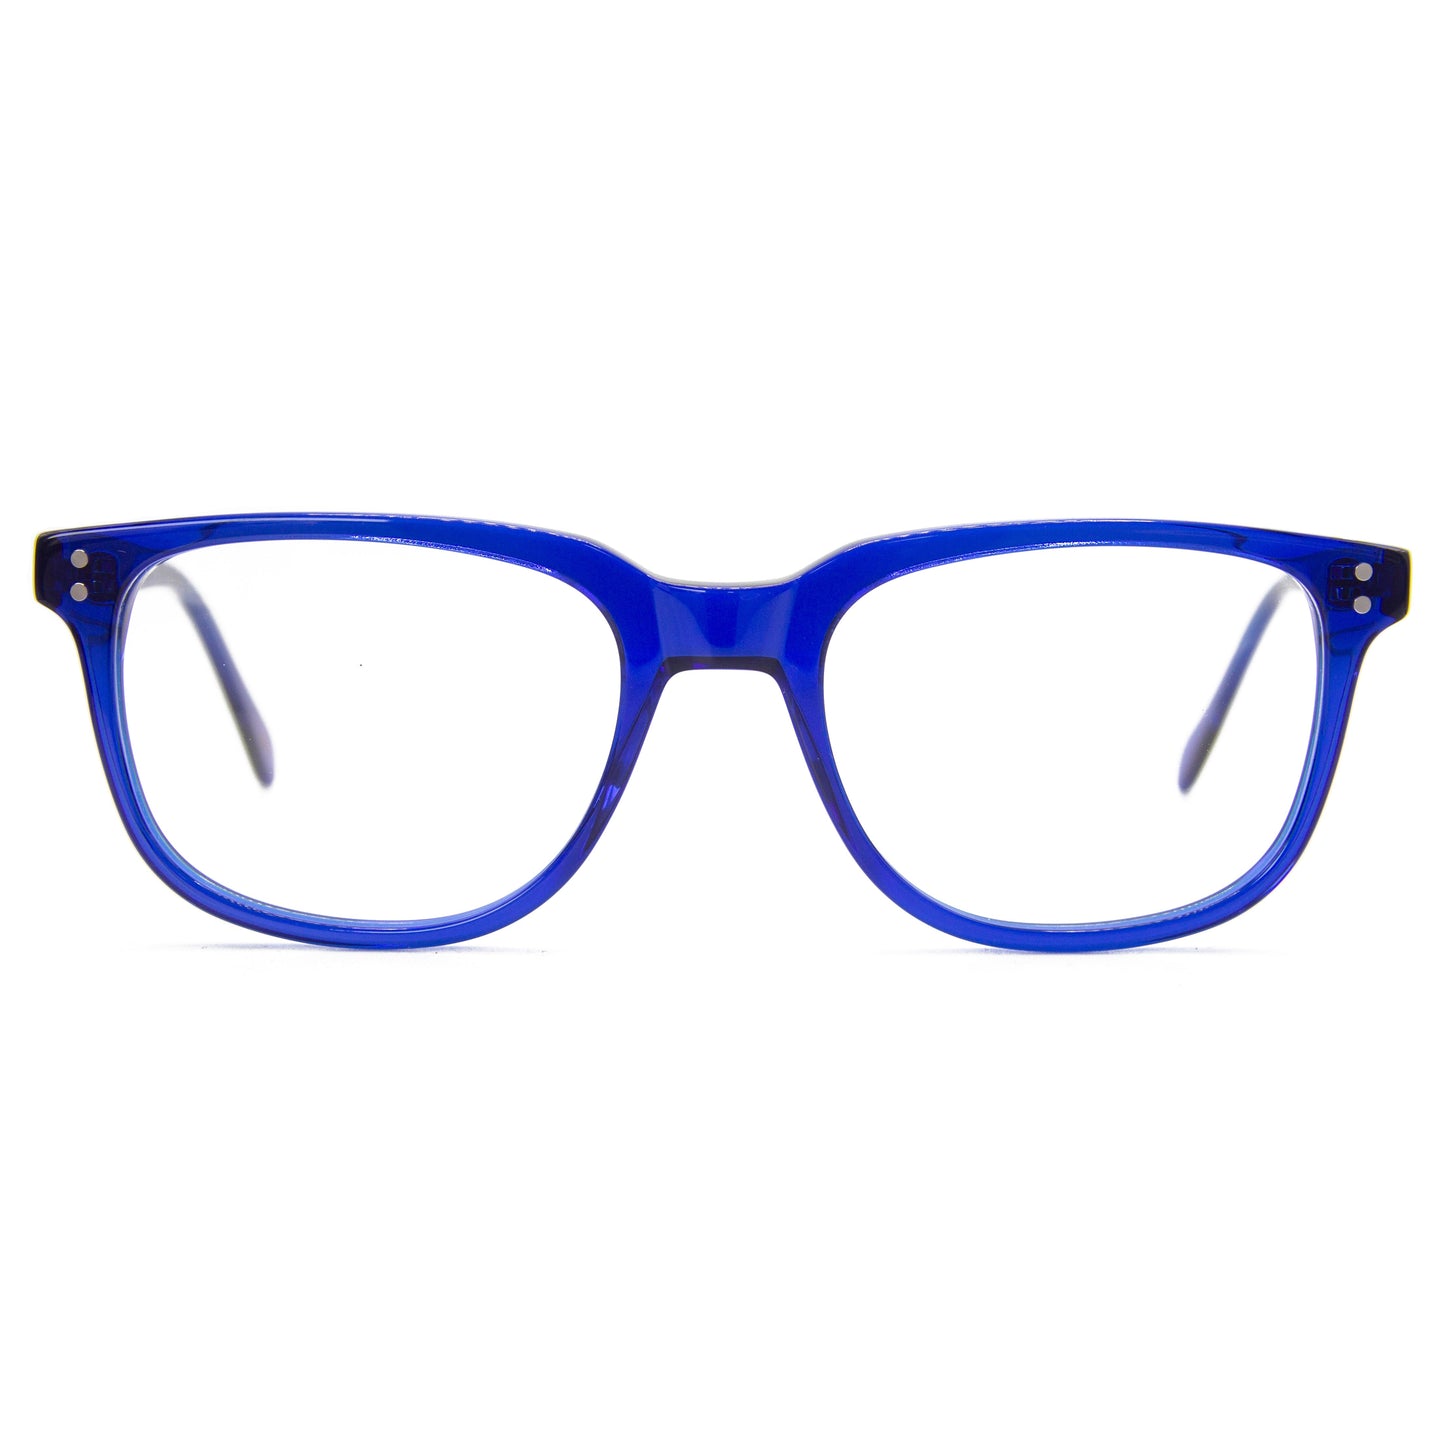 3 brothers - Theo - Navy - Prescription Glasses